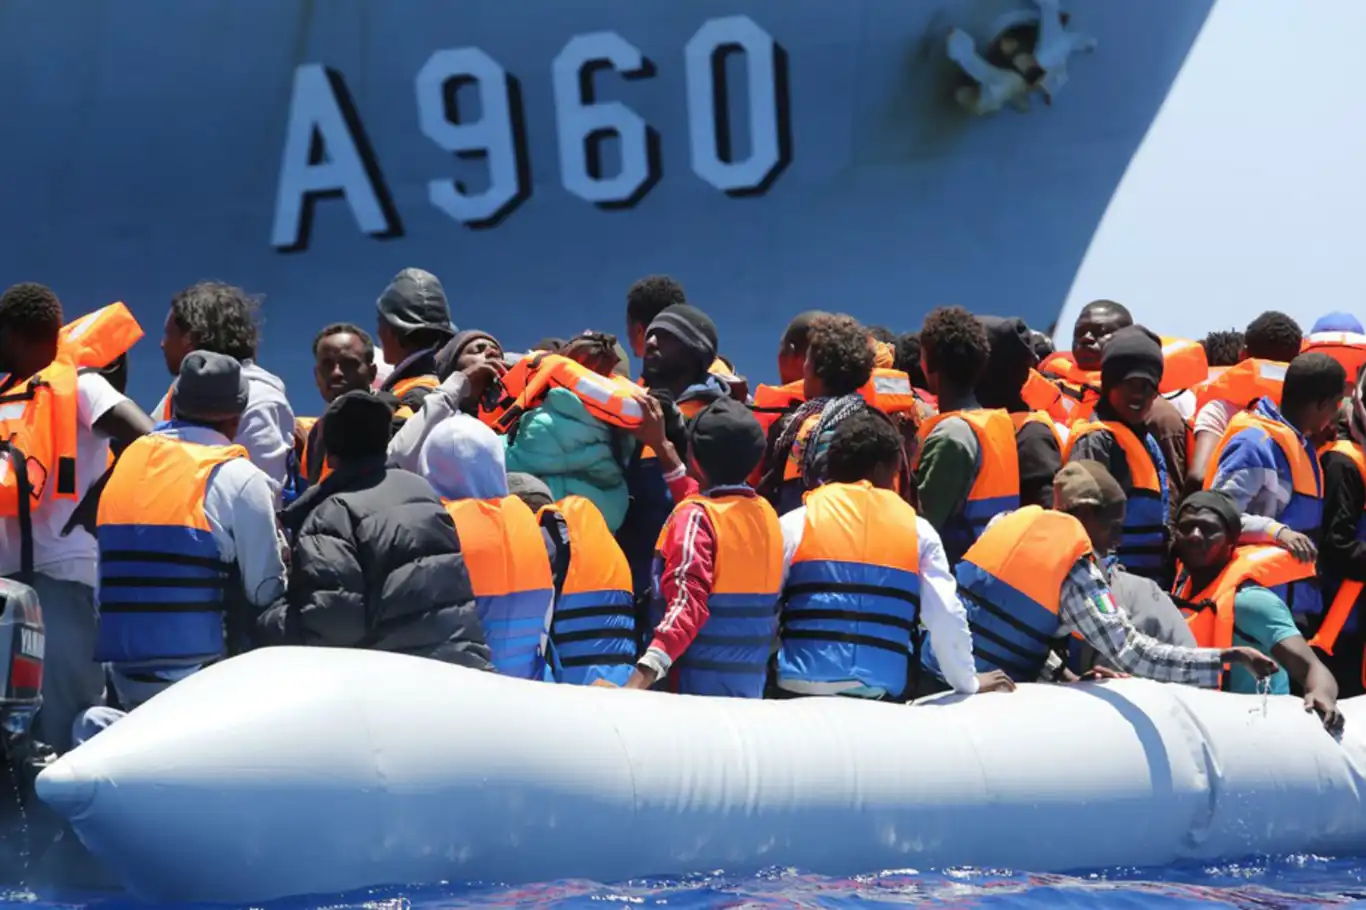 Italian government's pledge to welcome 1,500 refugees applauded by UNHCR